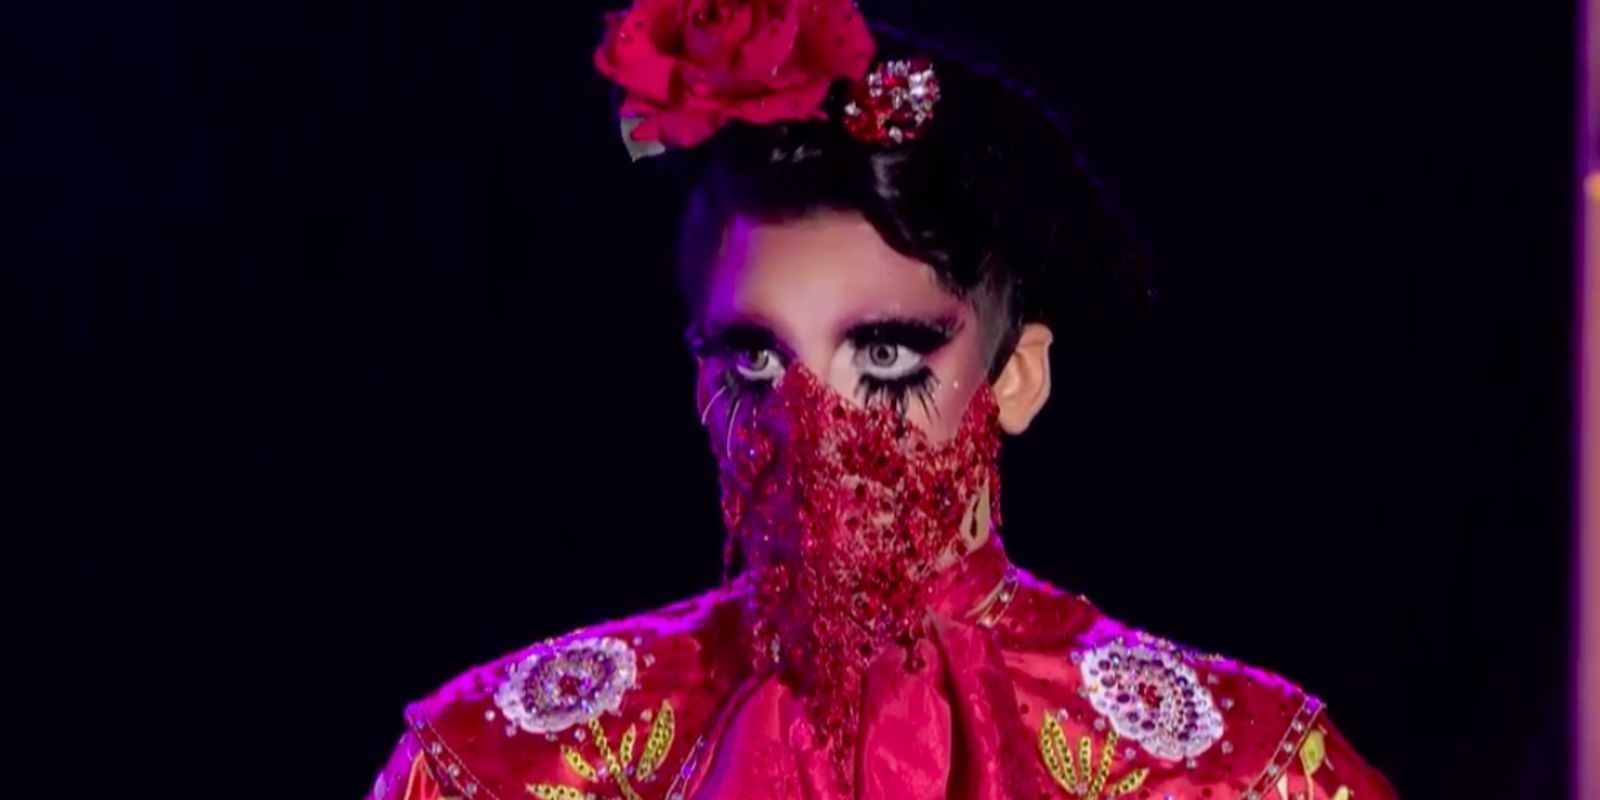 Valentina wears a mask on the main stage of RuPaul's Drag Race season 9